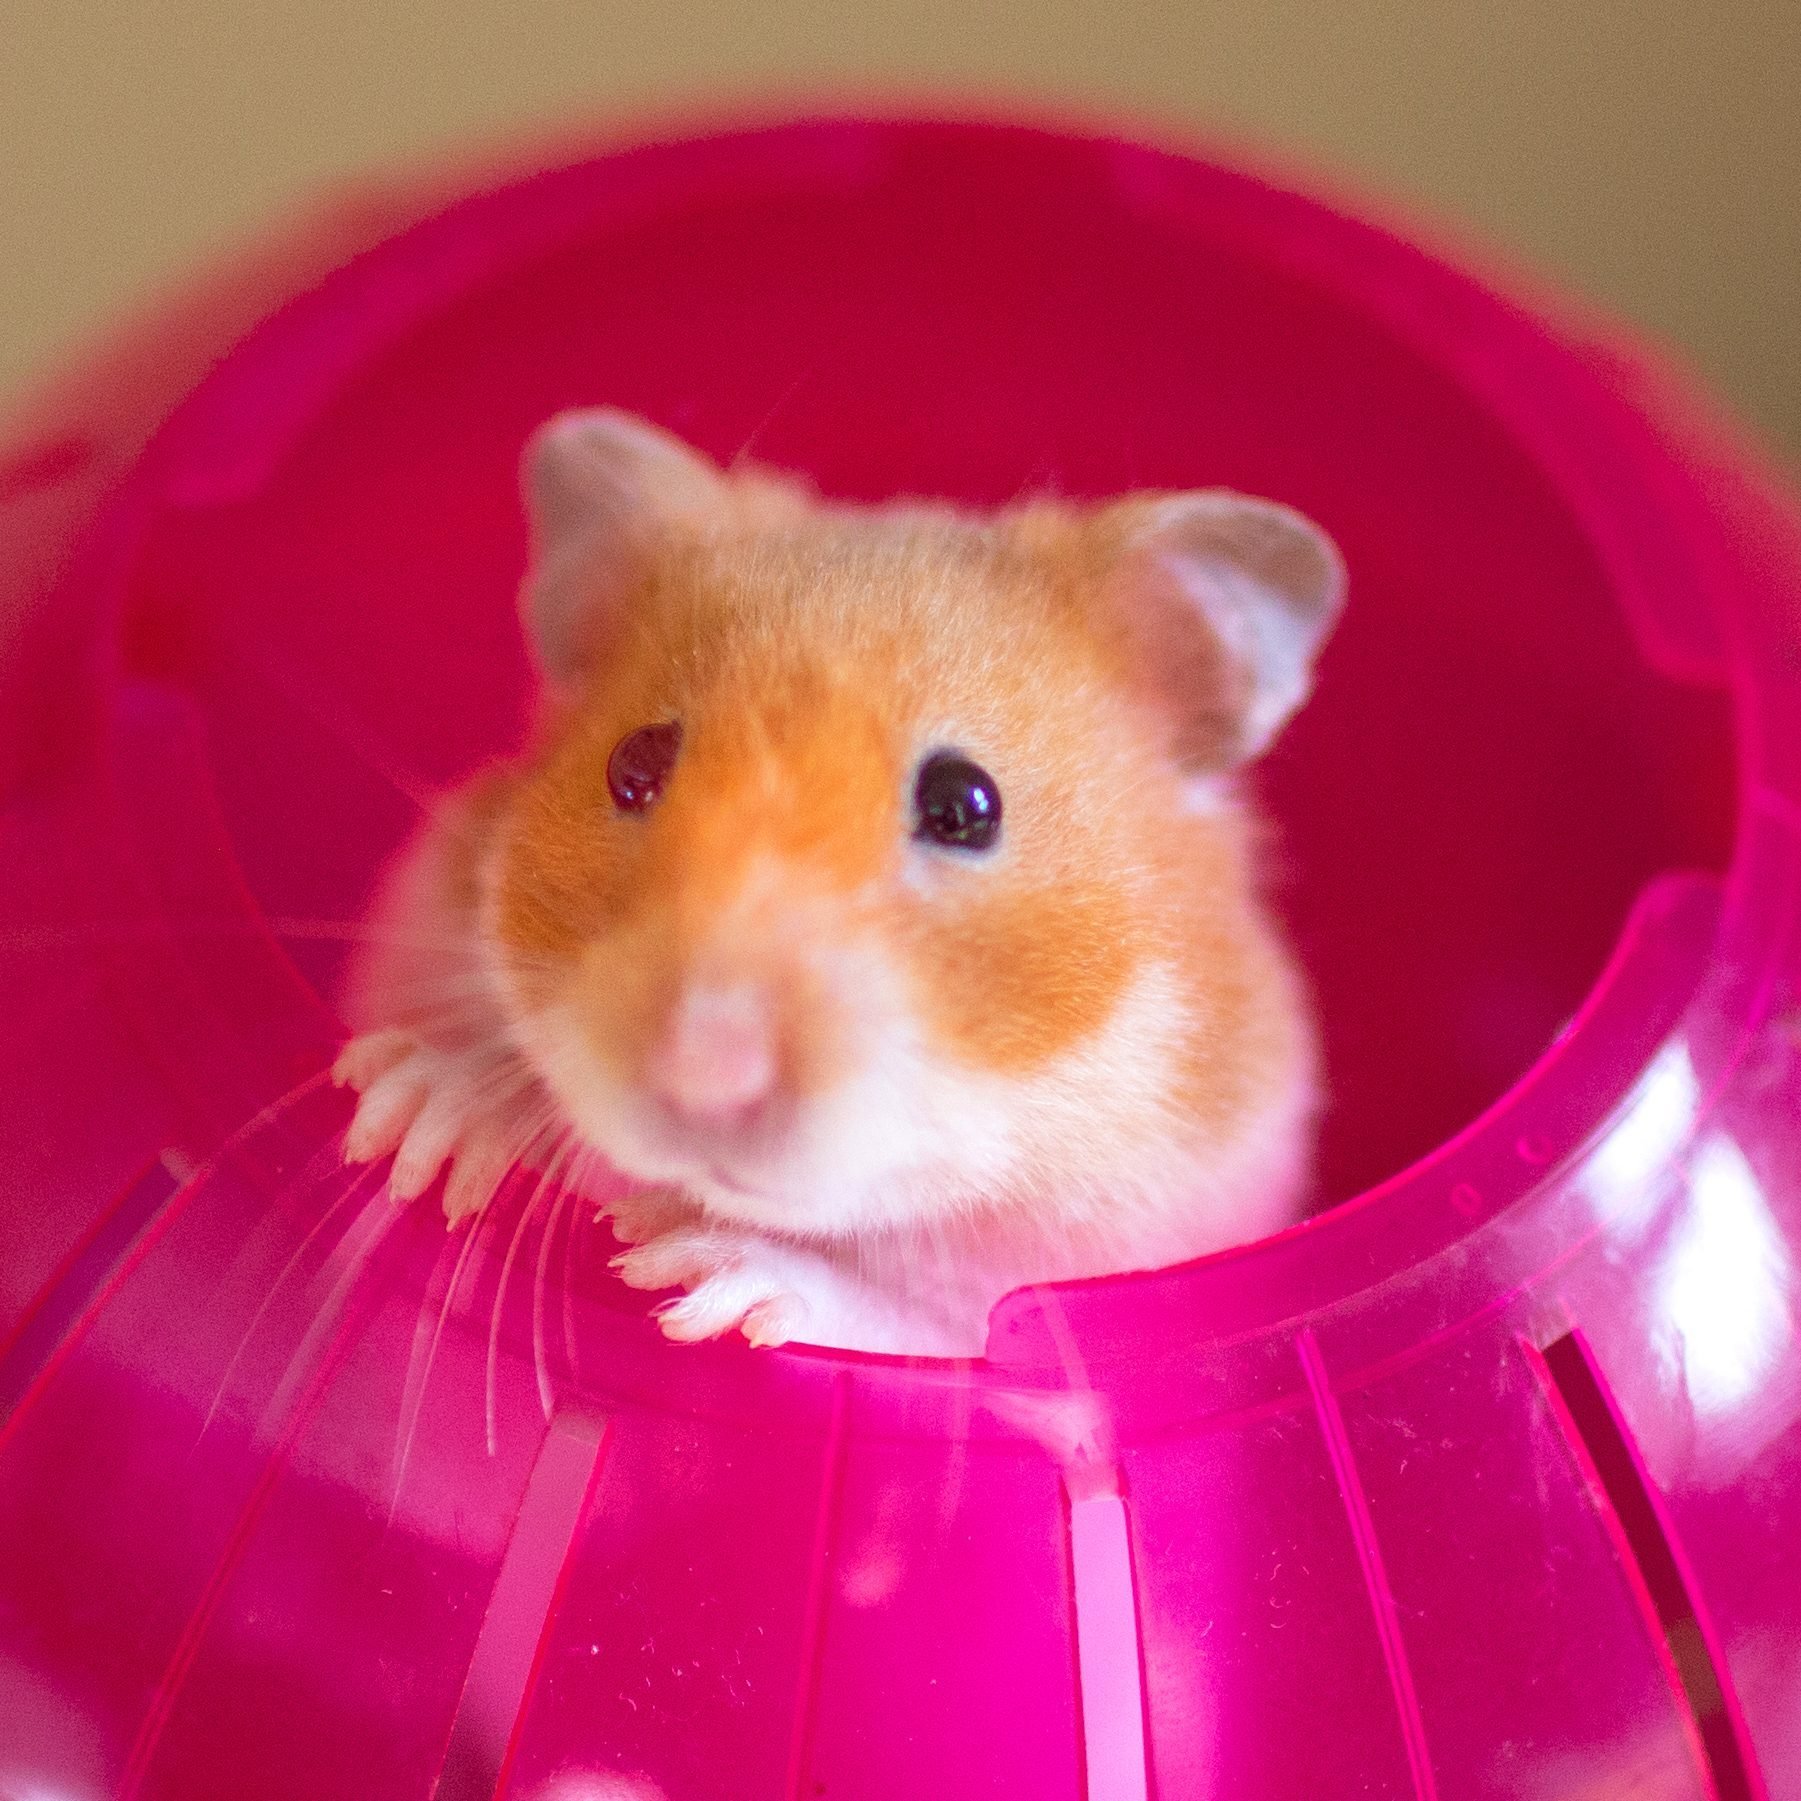 Cute Hamster Picture You Need to See. Funny Hamster Photo